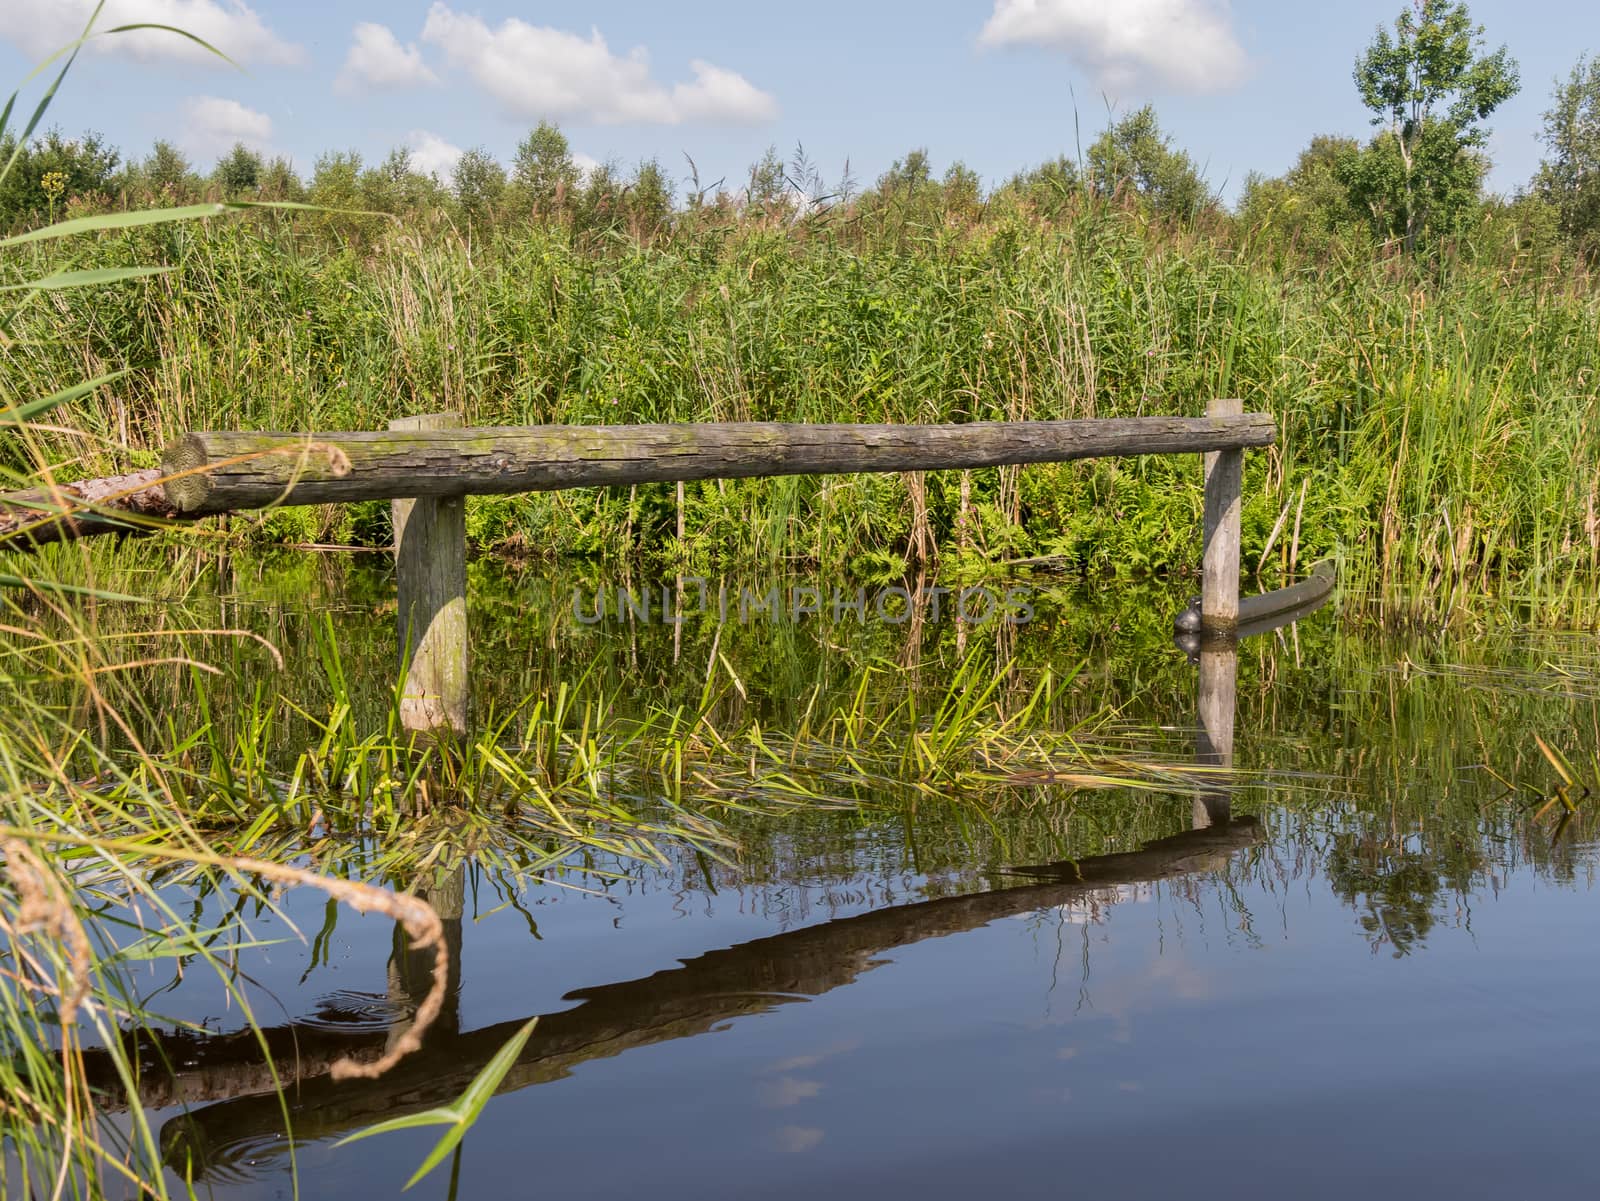 Reflections of wooden poles in a Dutch nature canal